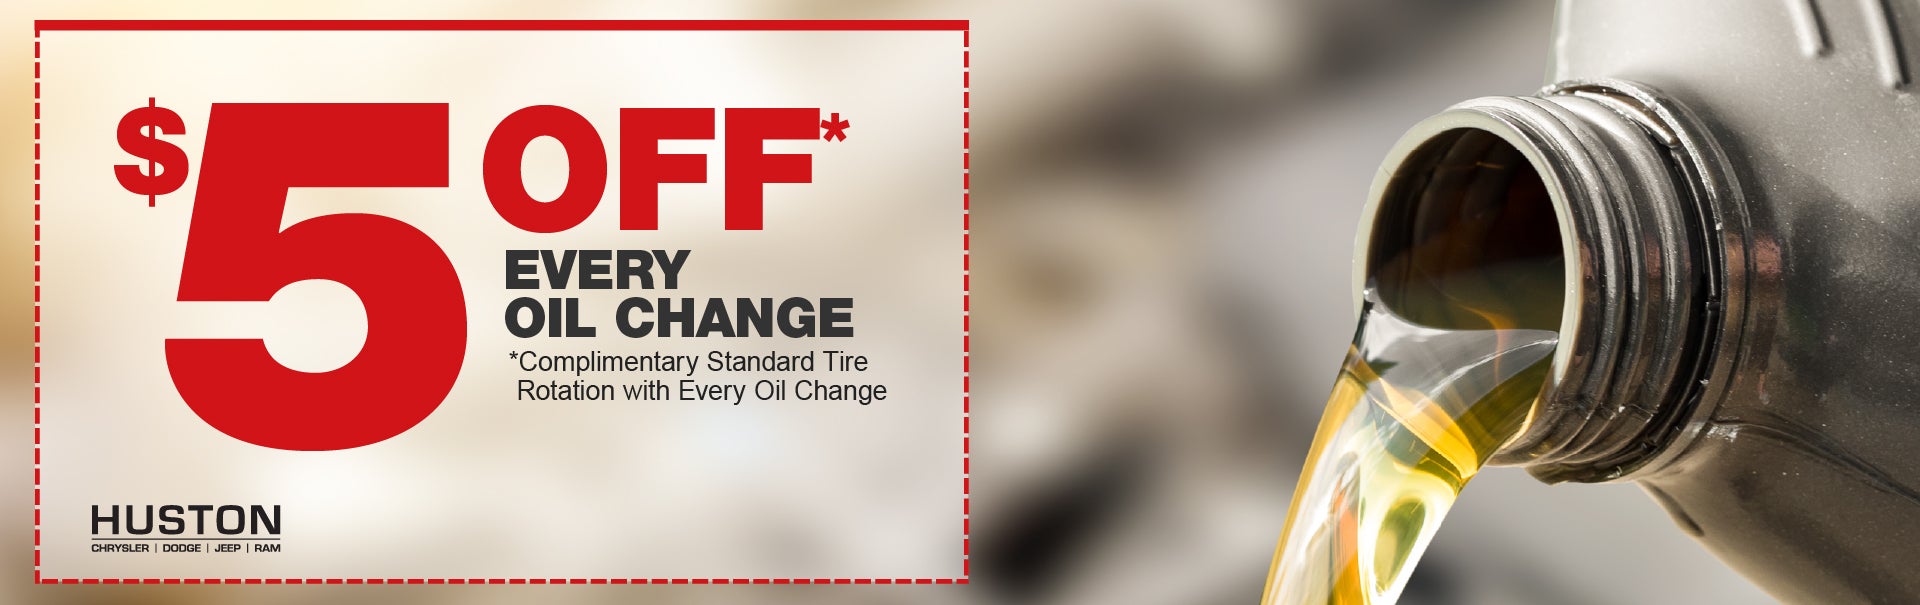 $5 off Every Oil Change